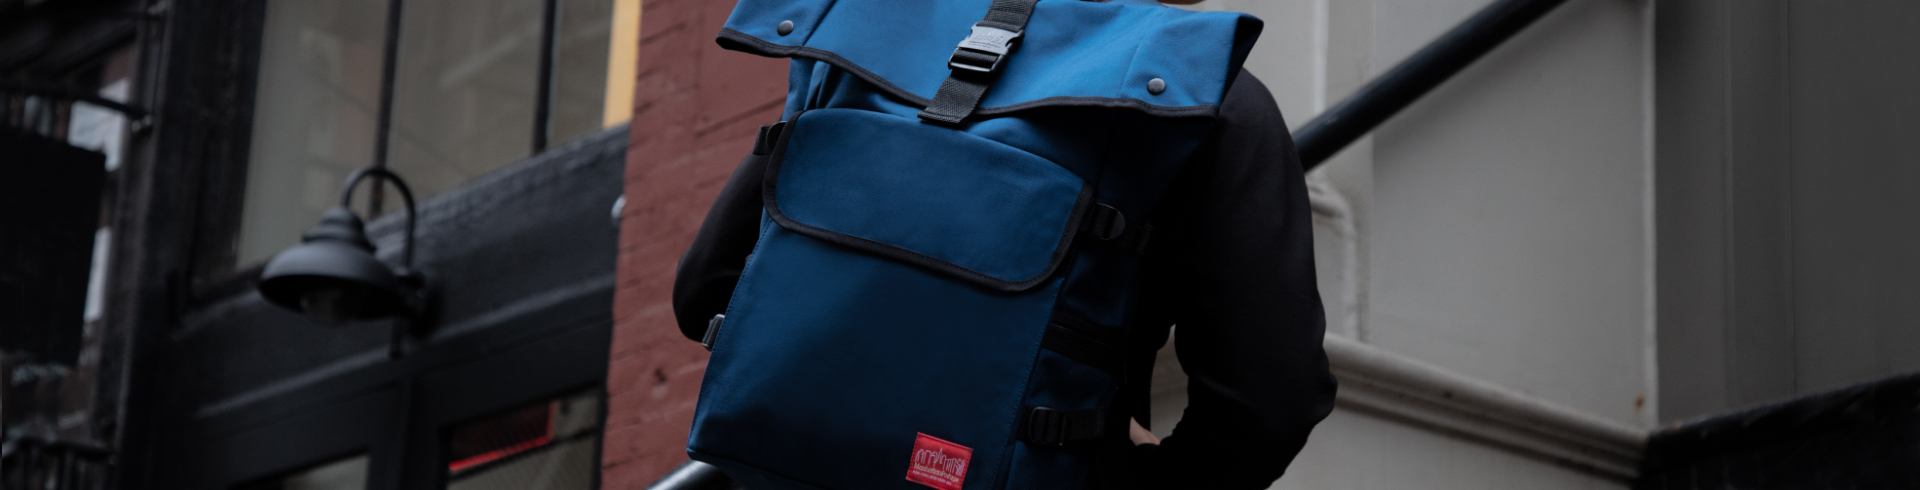 Navy Blue Manhattan Portage Chambers Black Label Backpack Large 